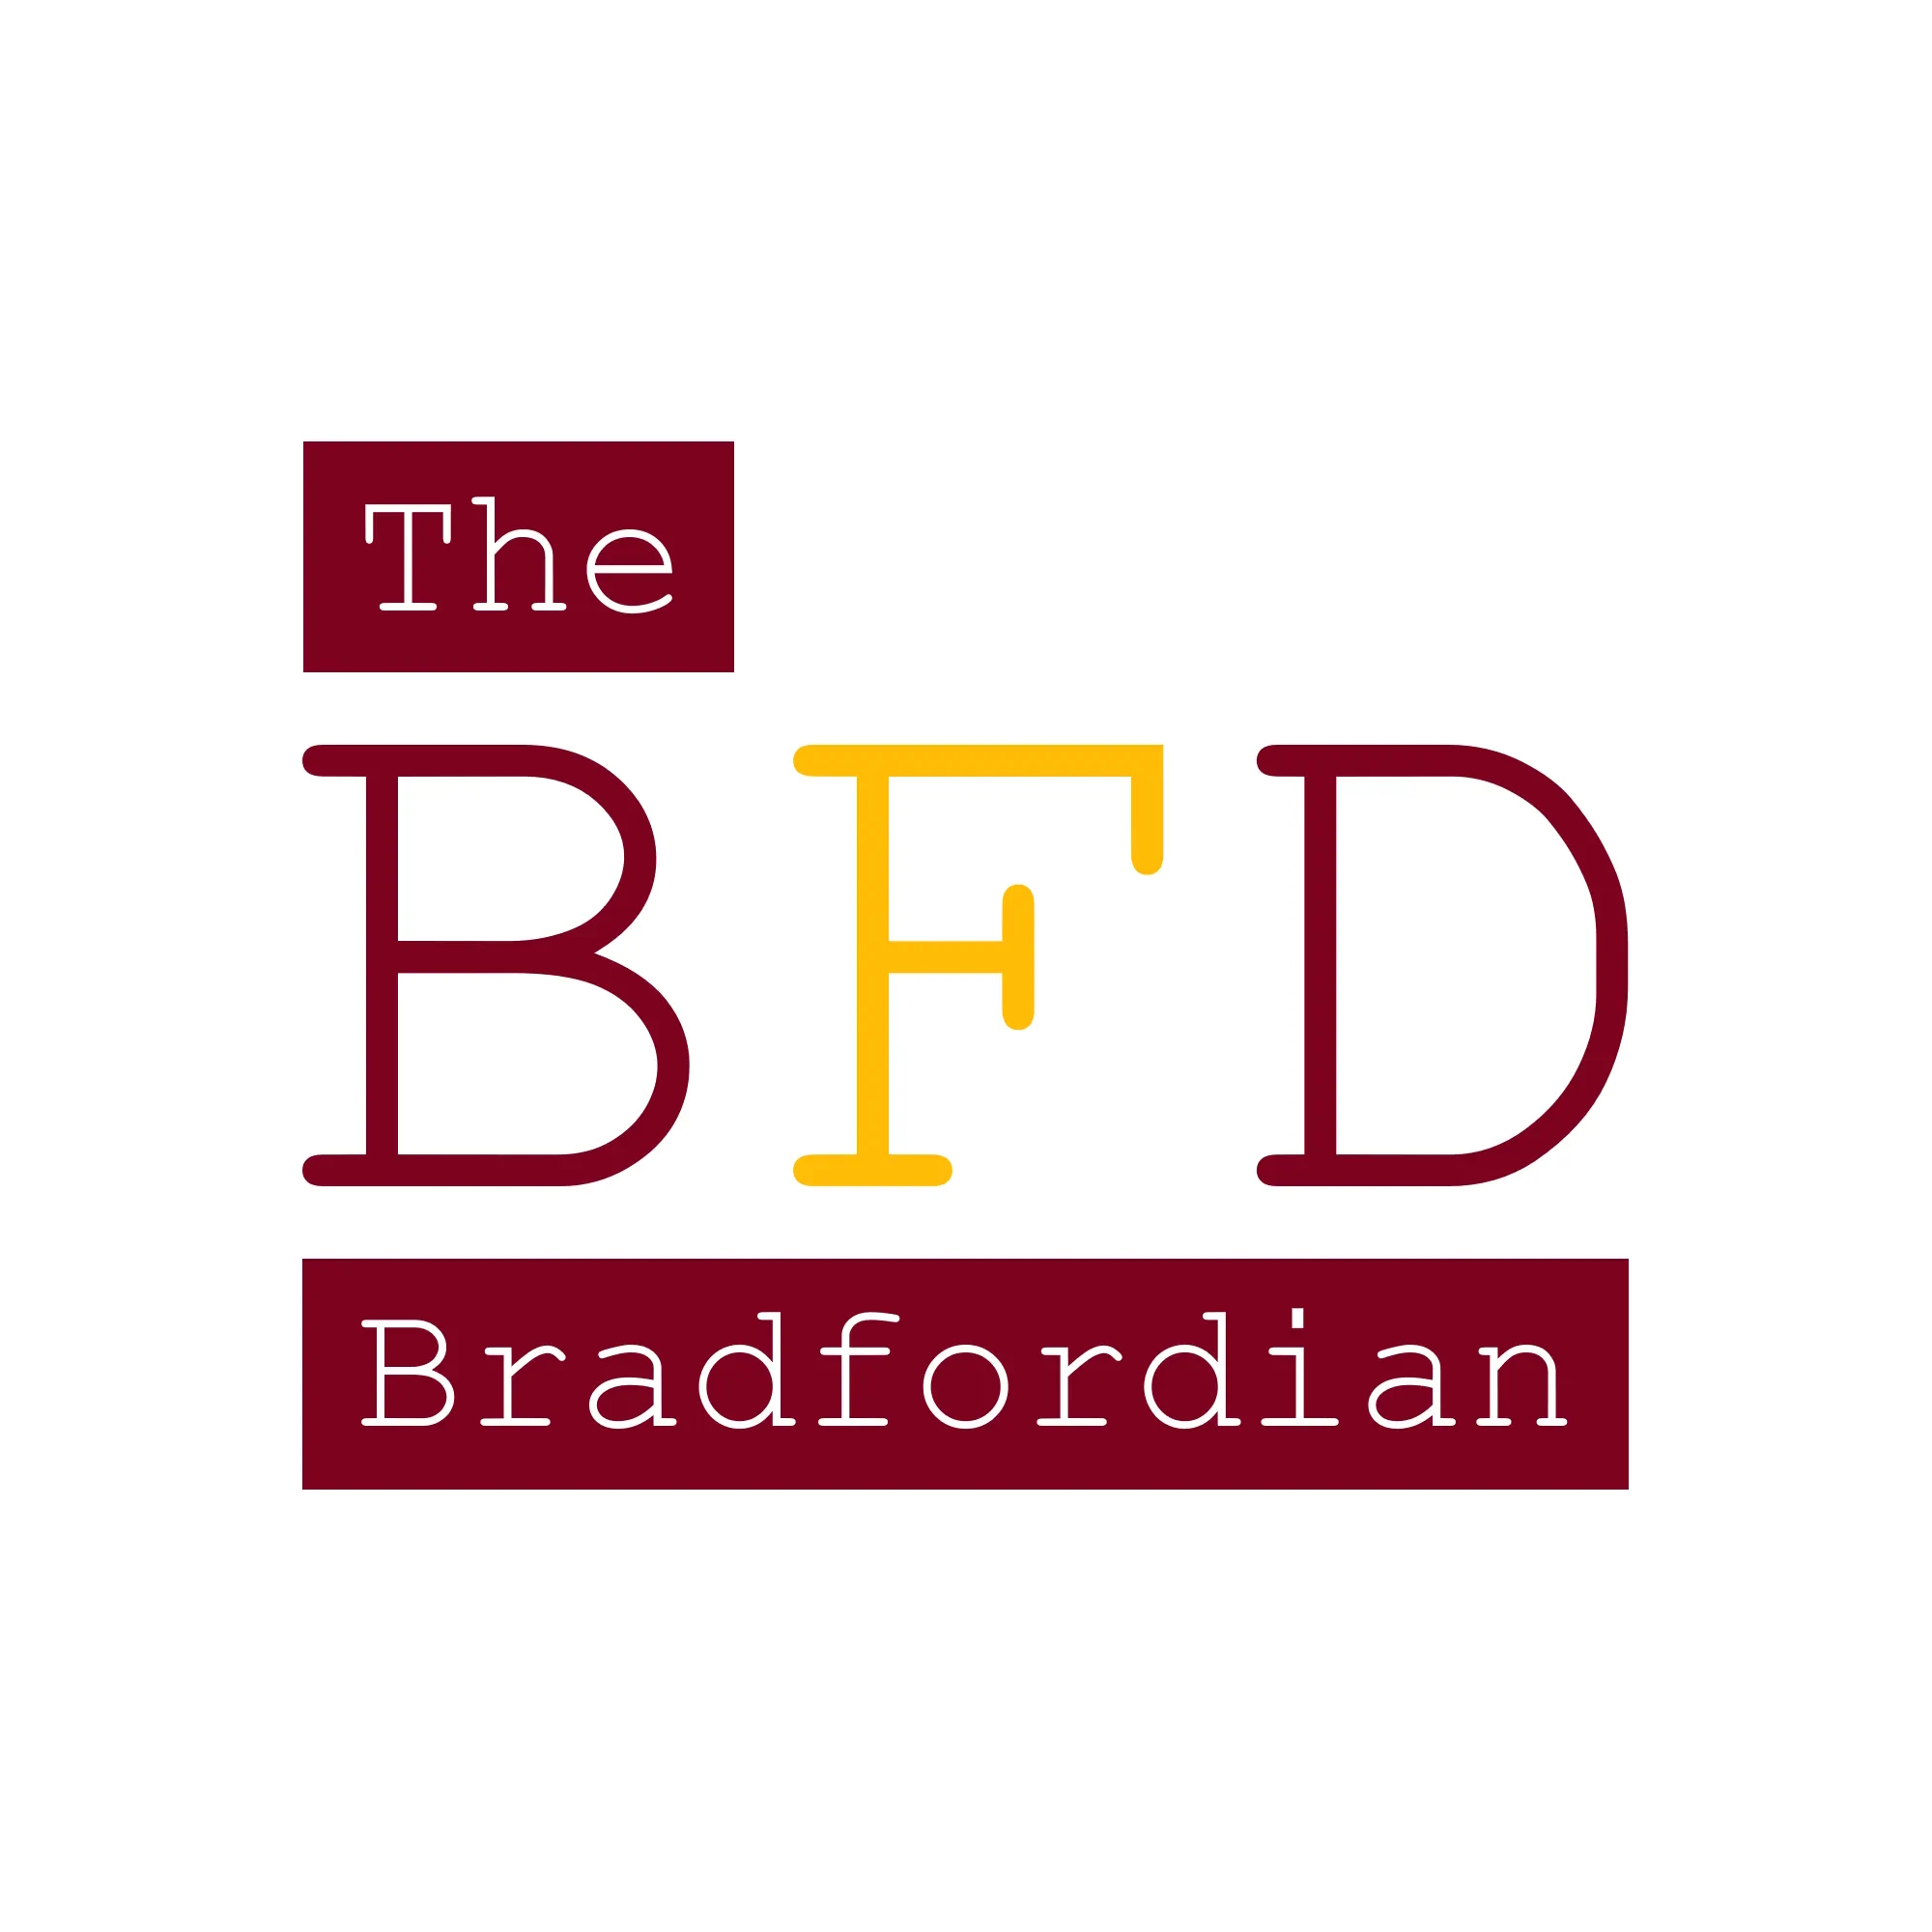 Bradfordian Is A Local News Website From Bradford, West Yorkshire